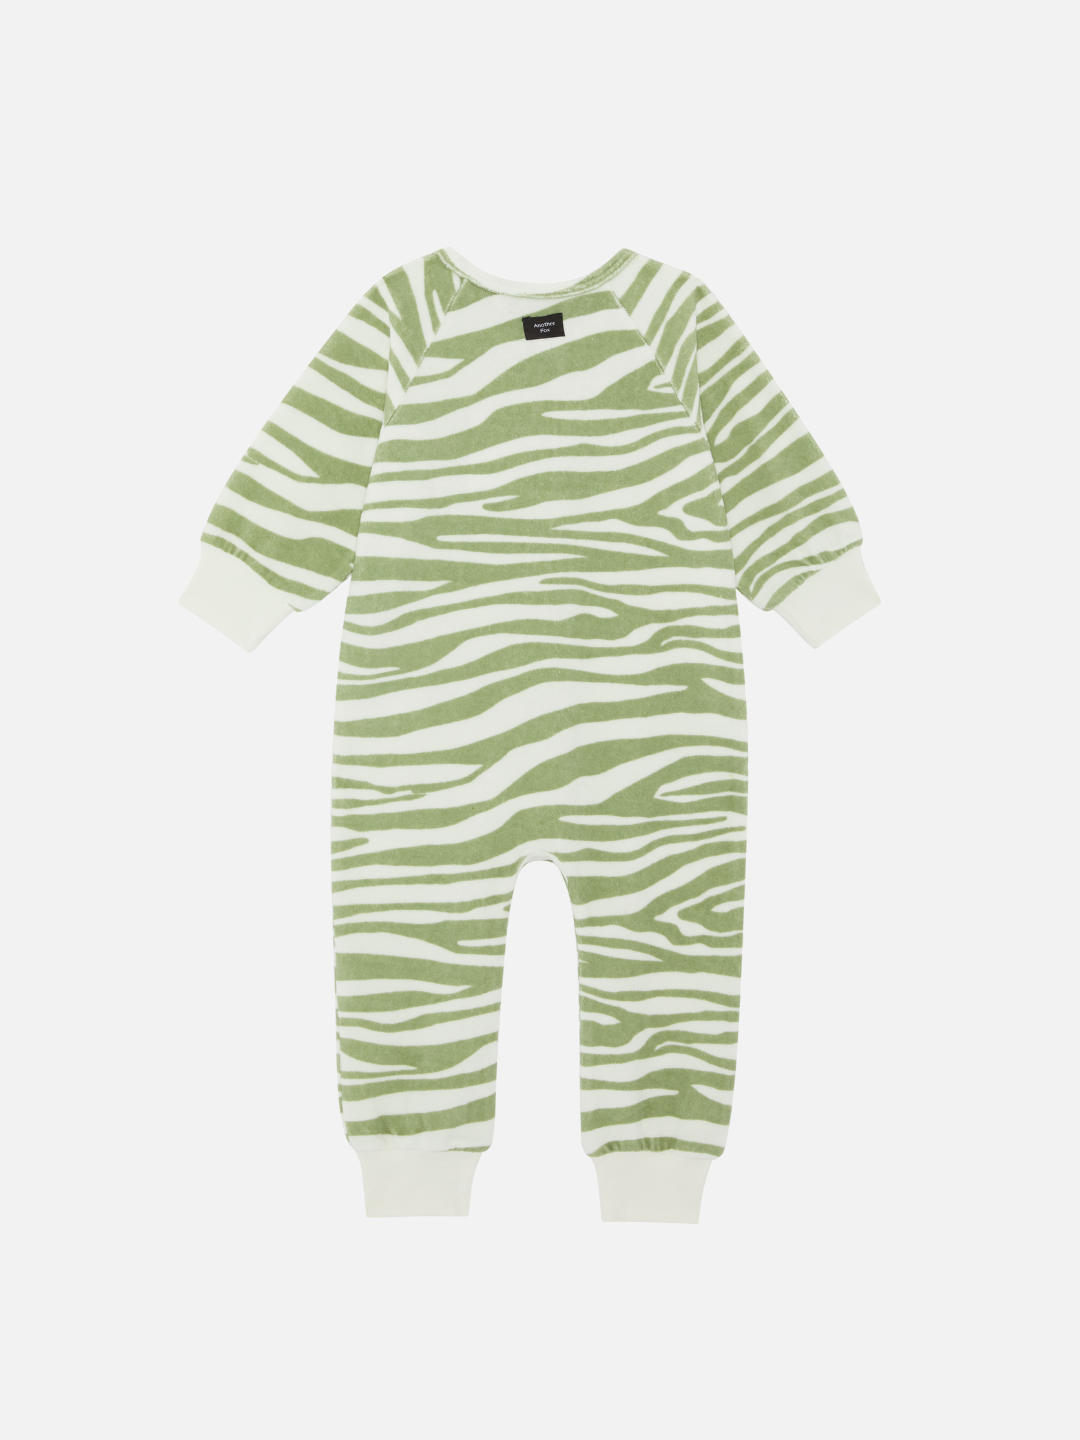 Tiger | A back view of the baby terry towel sleep suit in green tiger print